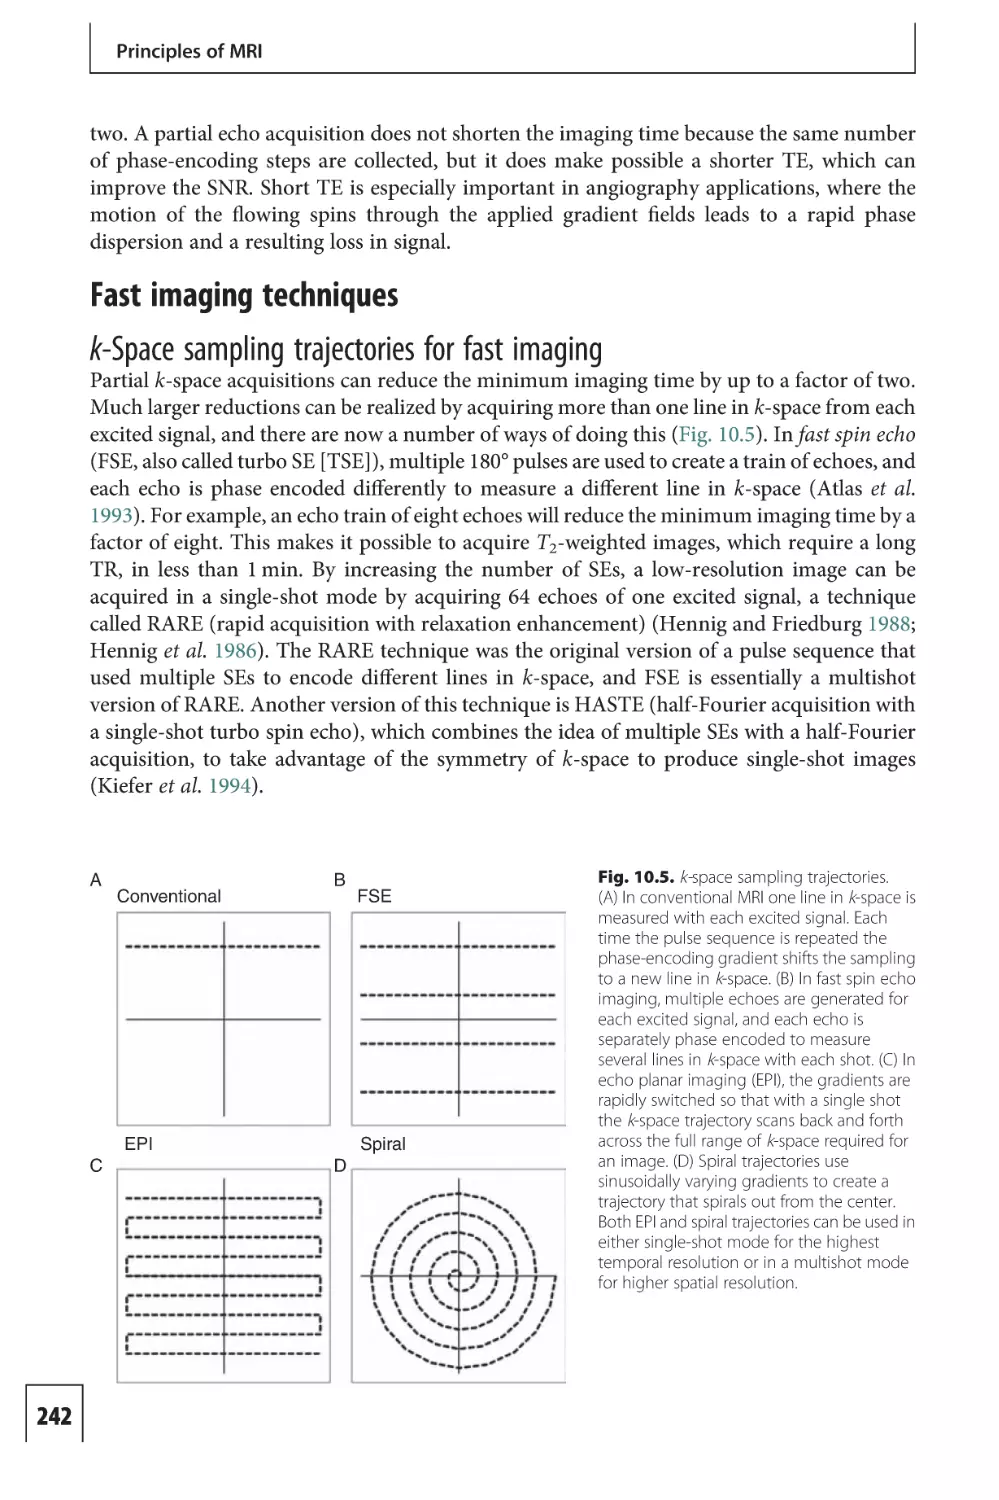 Fast imaging techniques
k-Space sampling trajectories for fast imaging